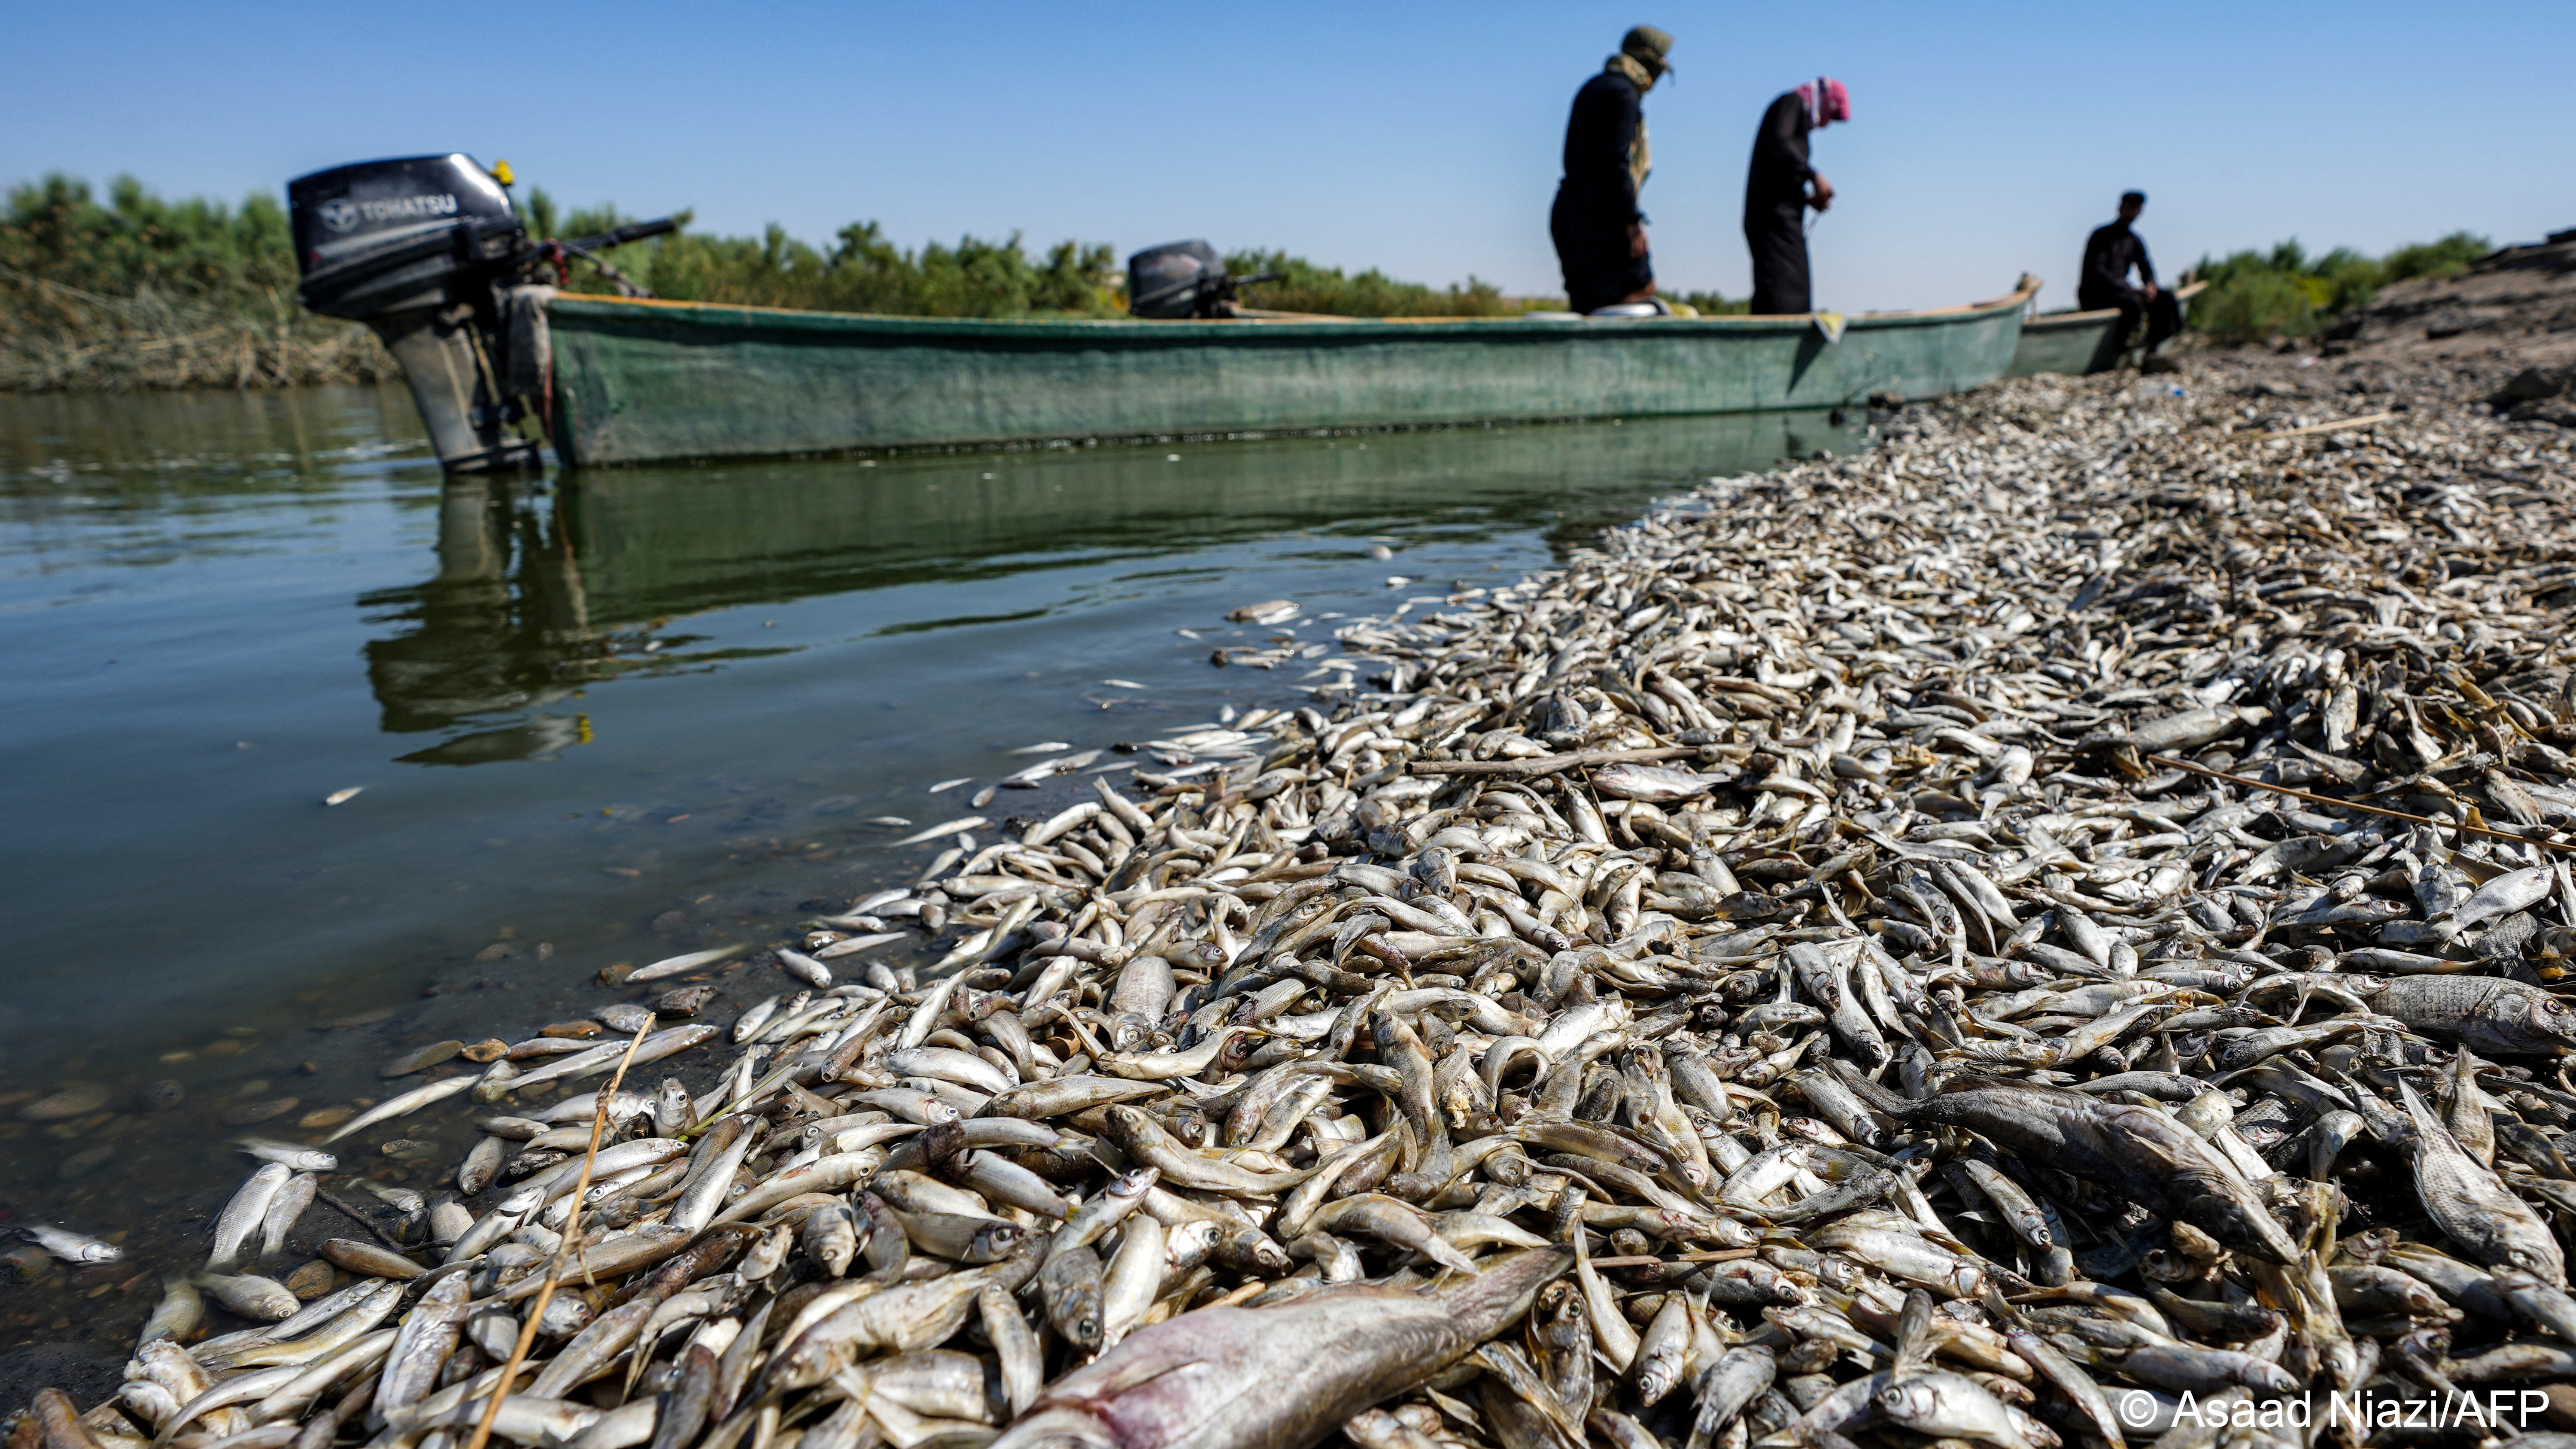 Fishers stand in a boat inspecting thousands of dead fish floating by the banks of the Amshan River (photo: Asaad Niazi/AFP)